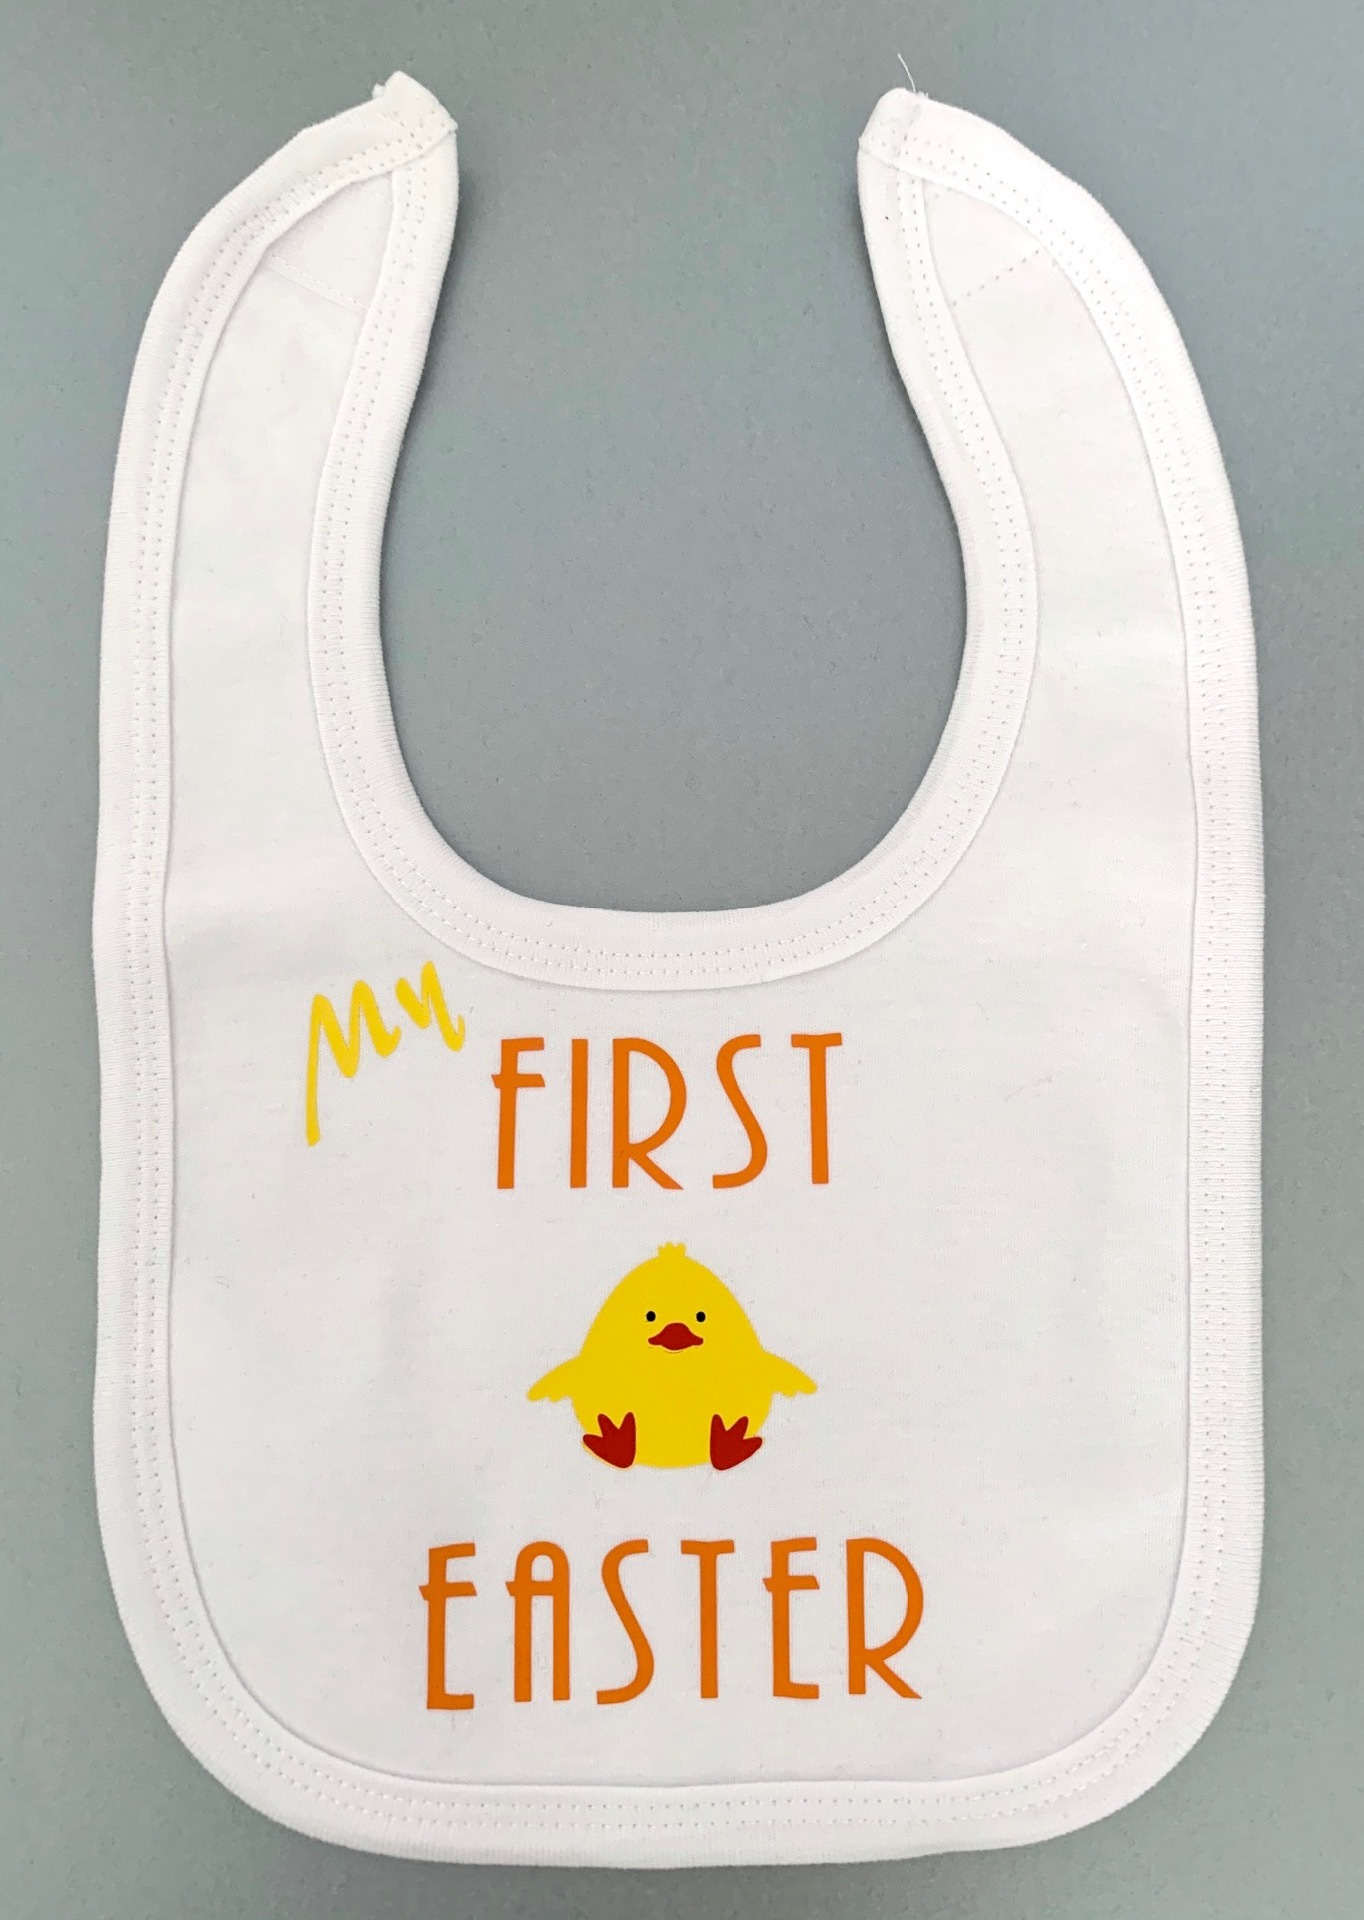 My First Easter Baby Bib